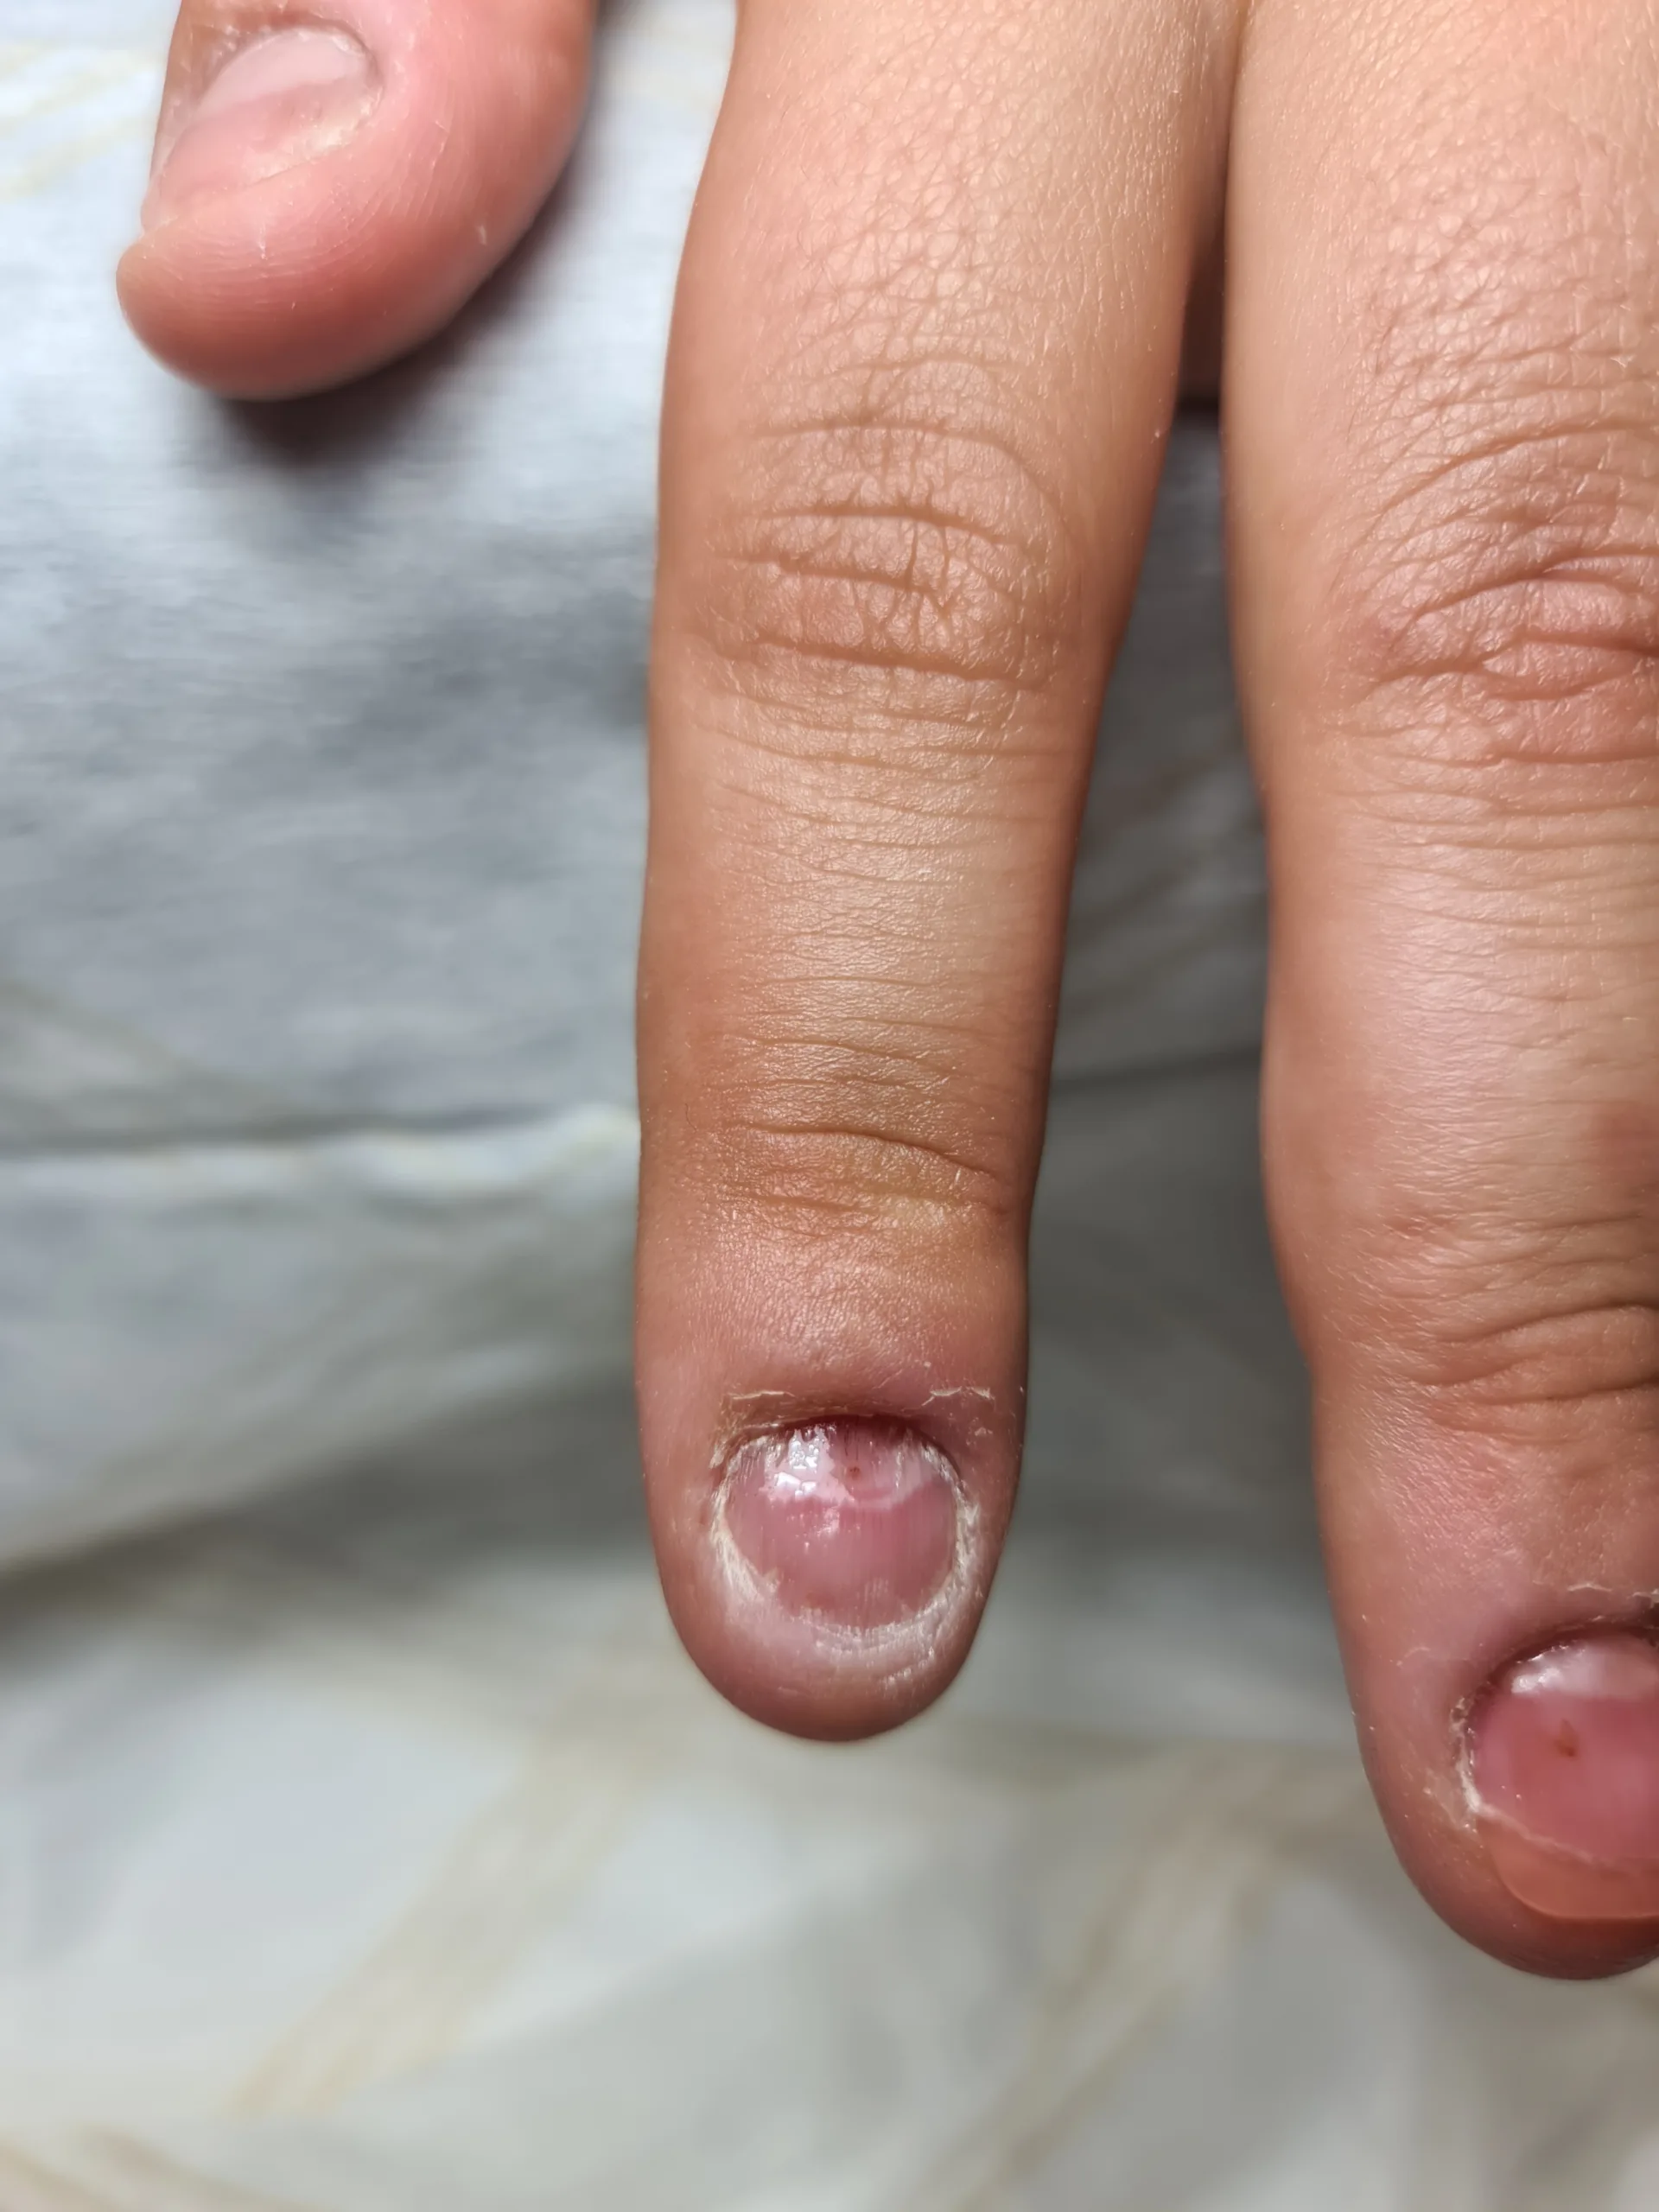 I Tried Everything to Quit Biting My Nails—Here's What Finally Worked